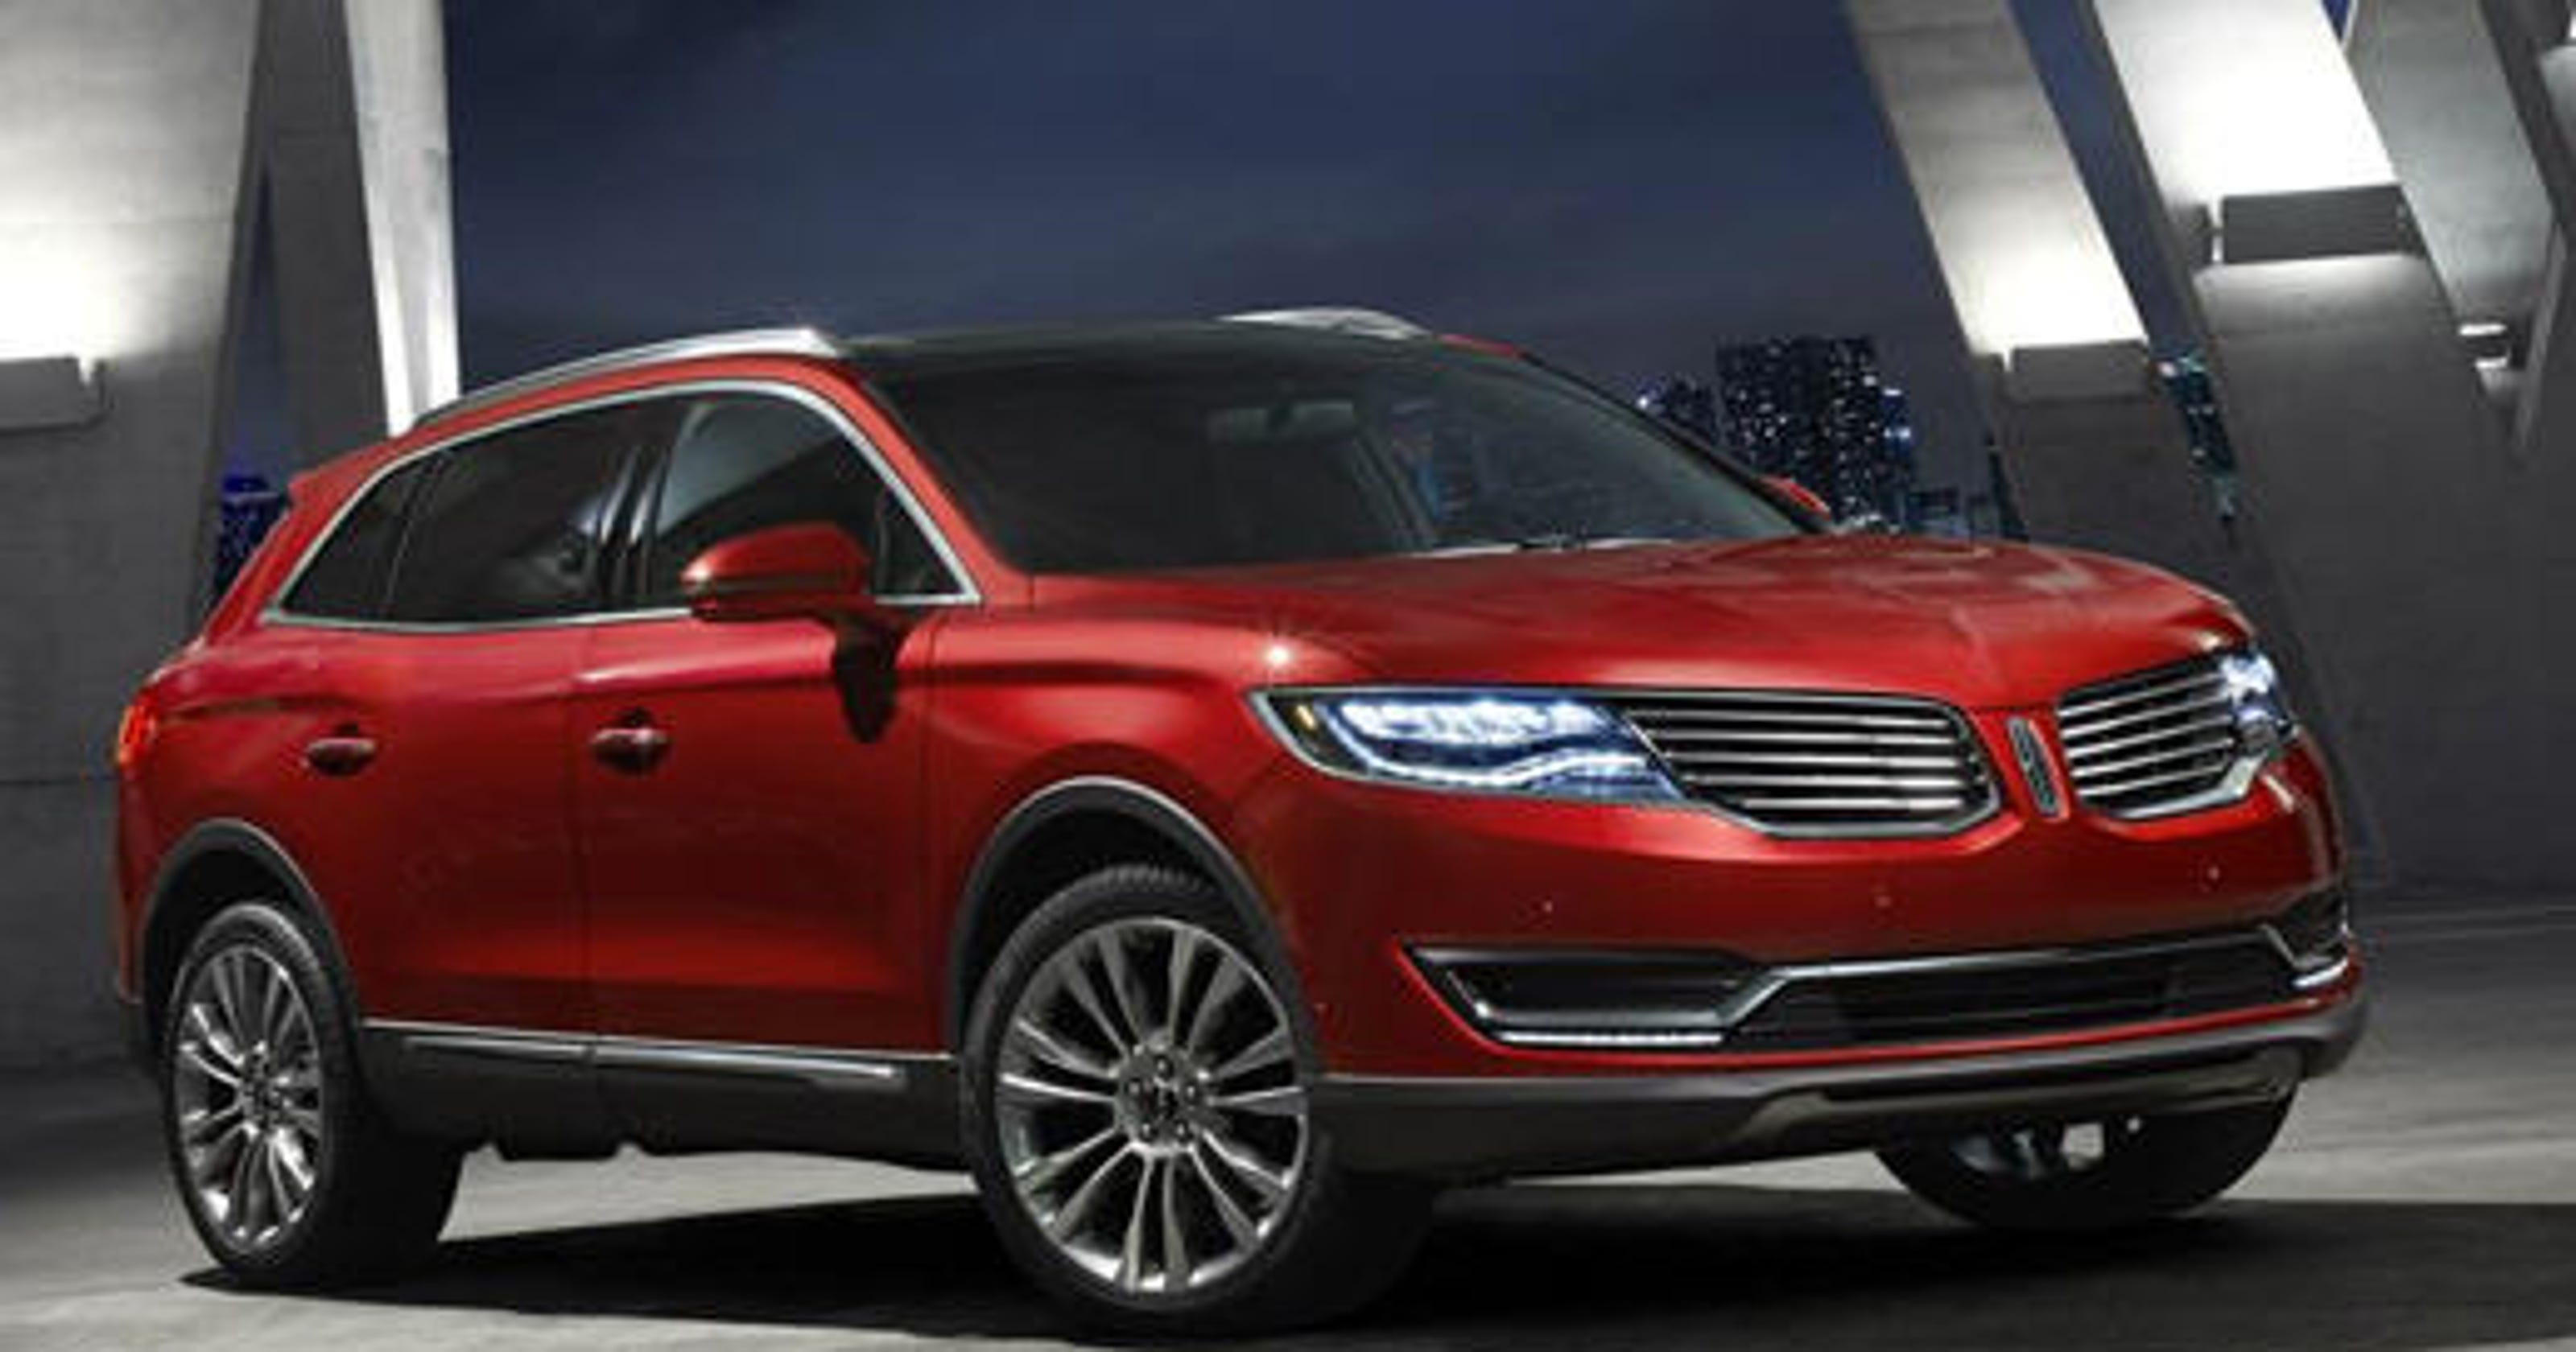 Lincoln unveils new MKX midsize SUV